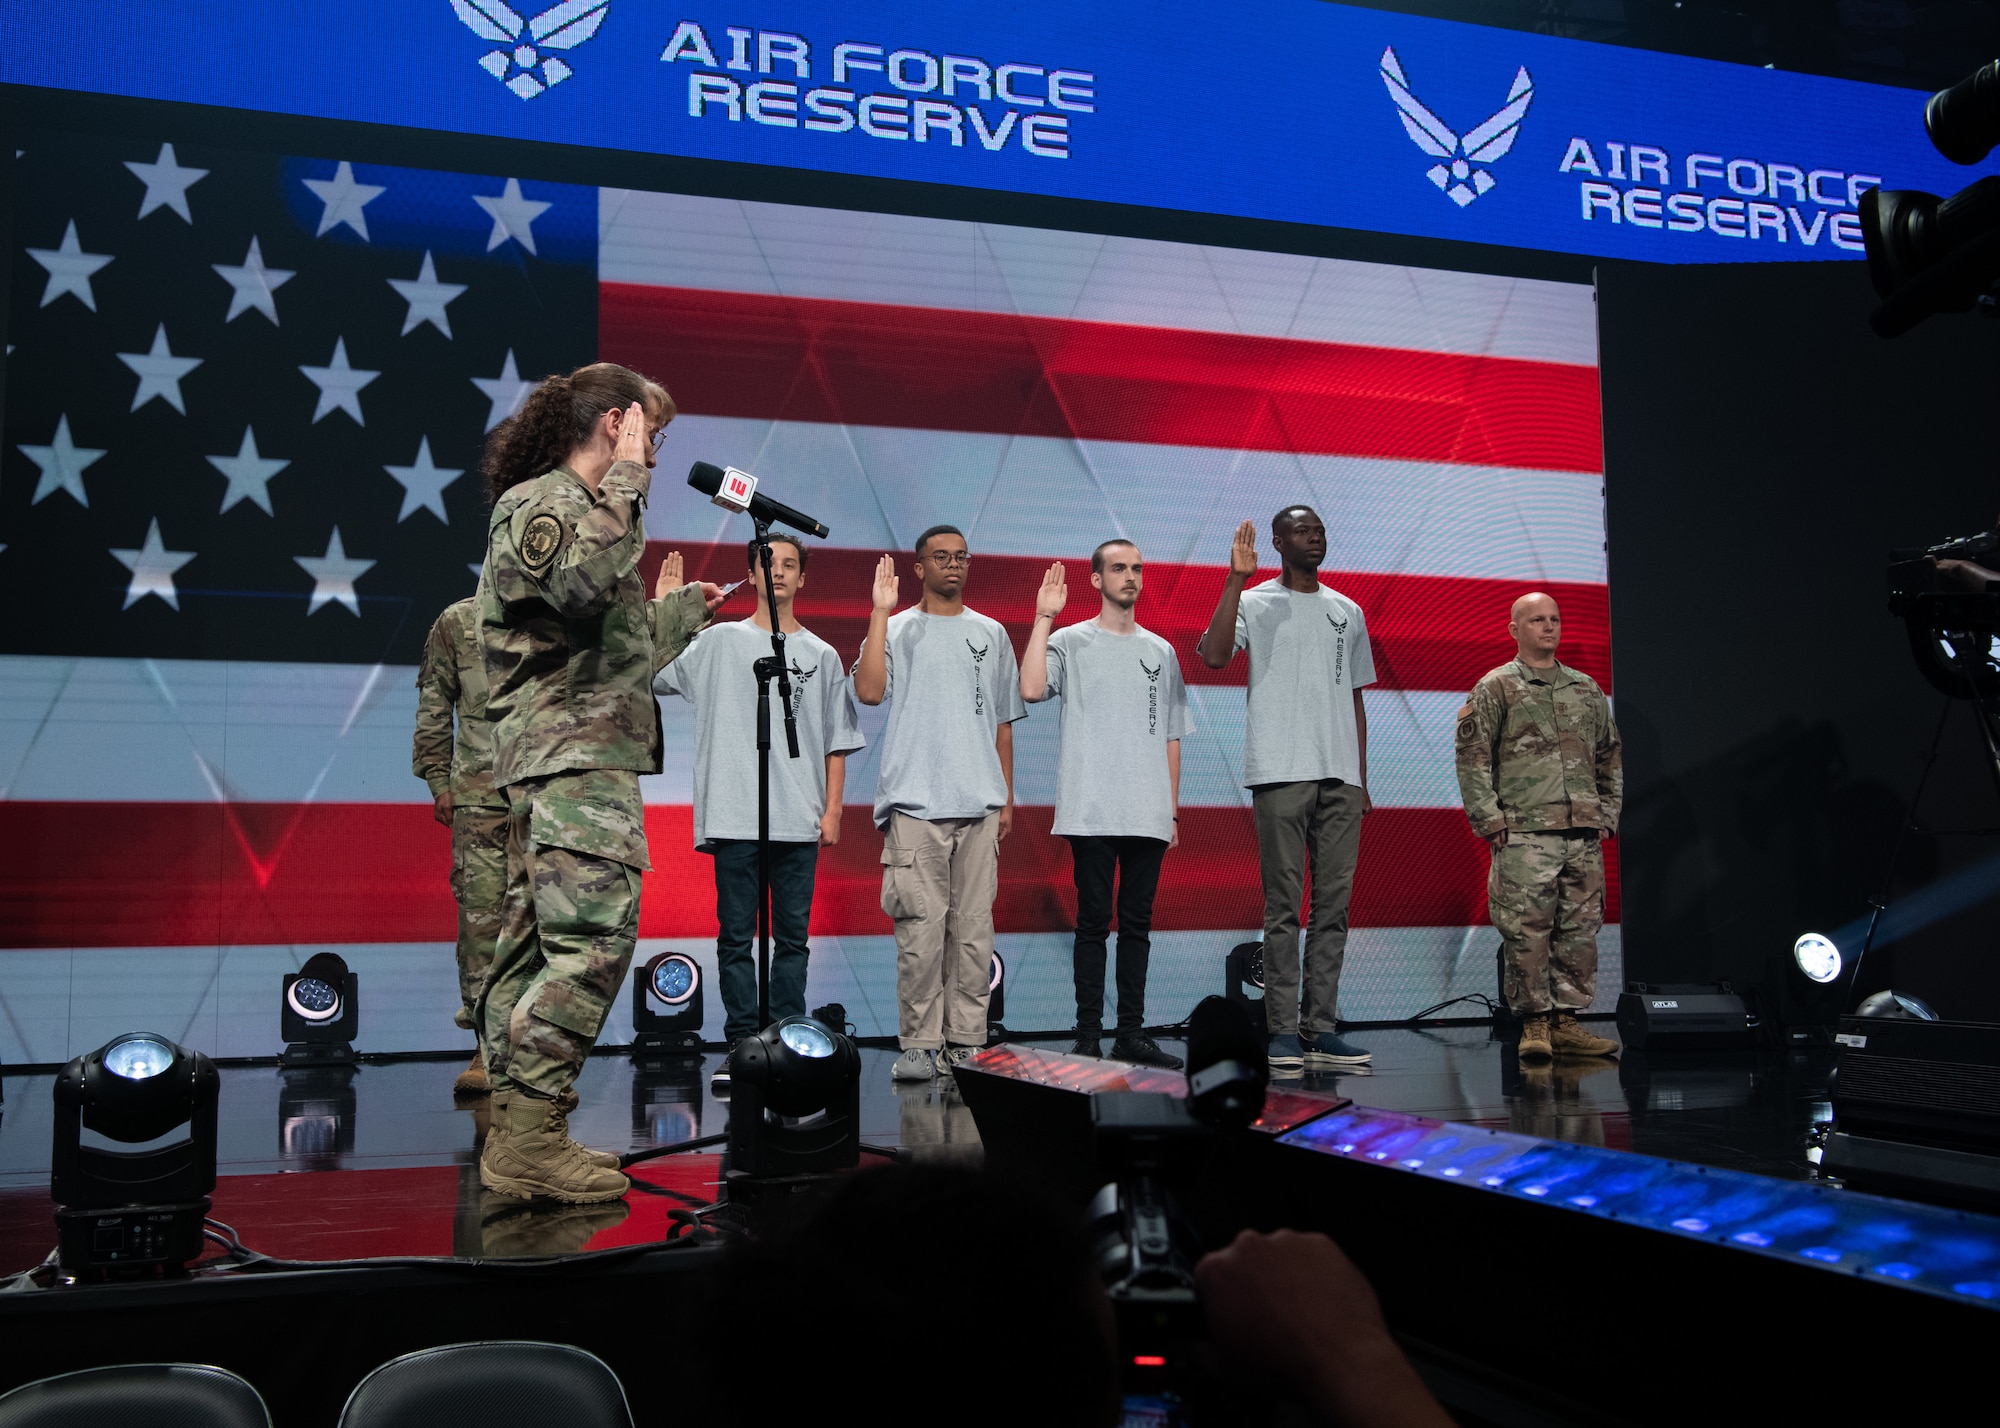 A general officer administers the Air Force oath of enlistment